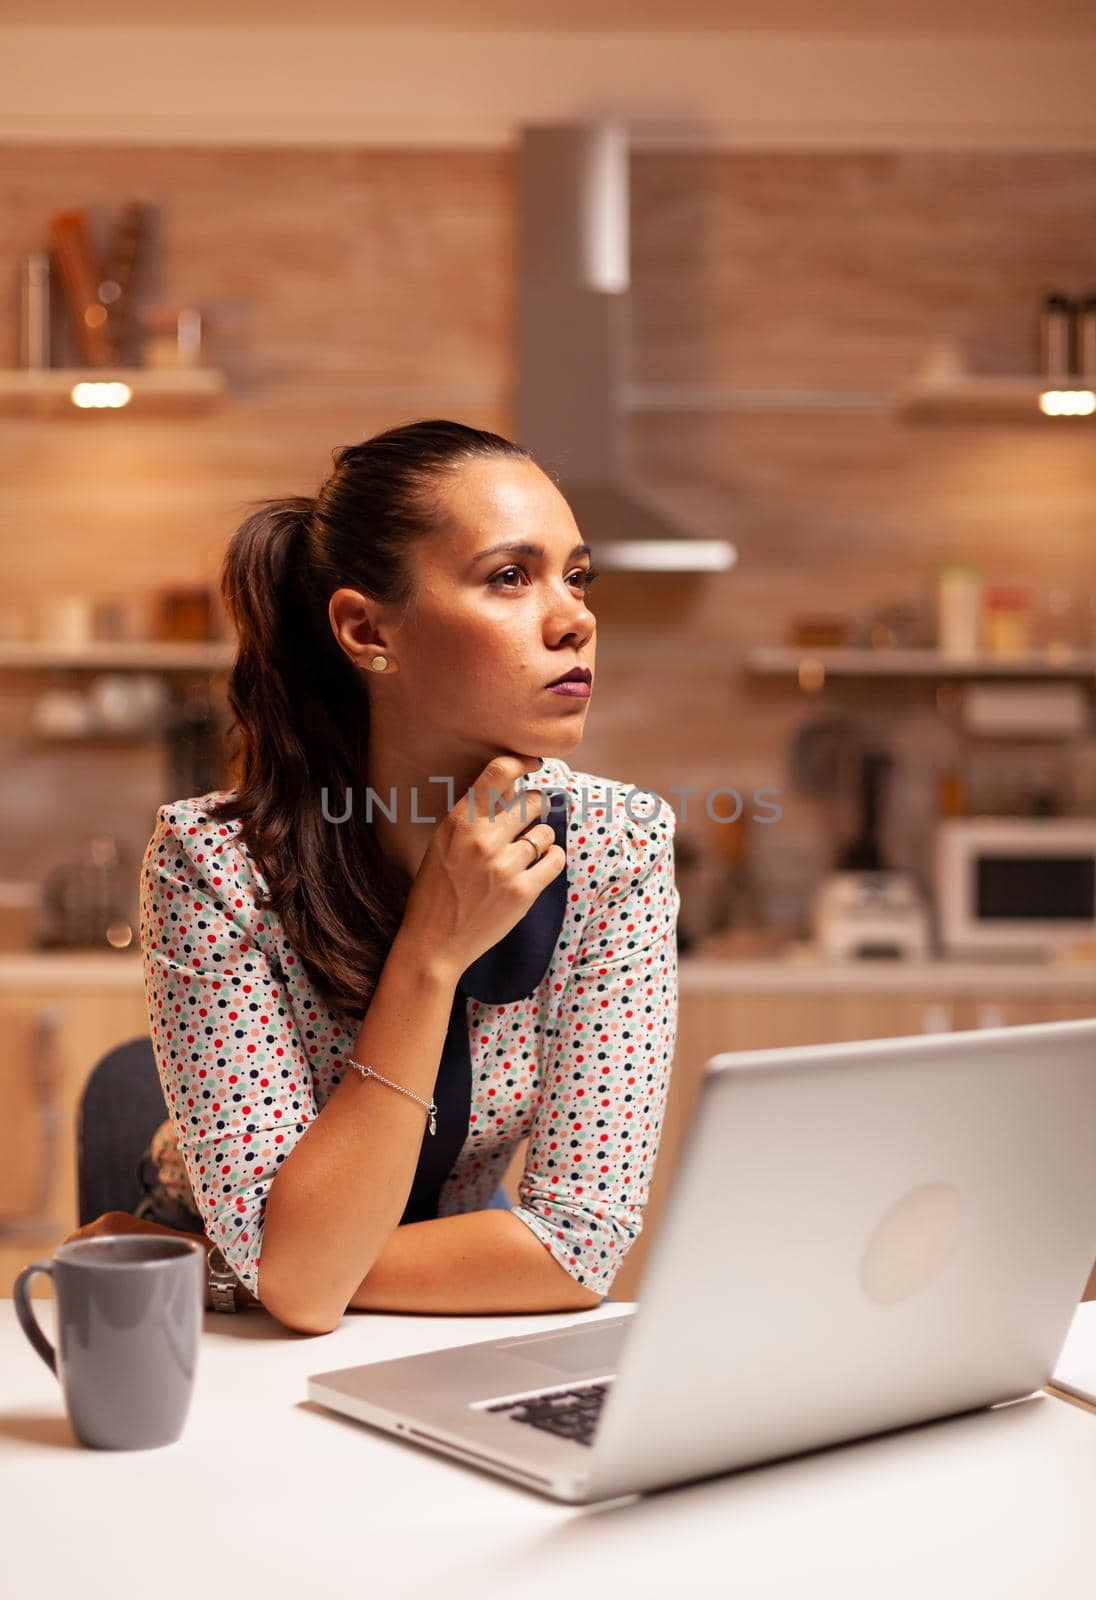 Concentrated businesswoman in home kitchen while working late at night on laptop. Employee using modern technology at midnight doing overtime for job, business, busy, career, network, lifestyle.